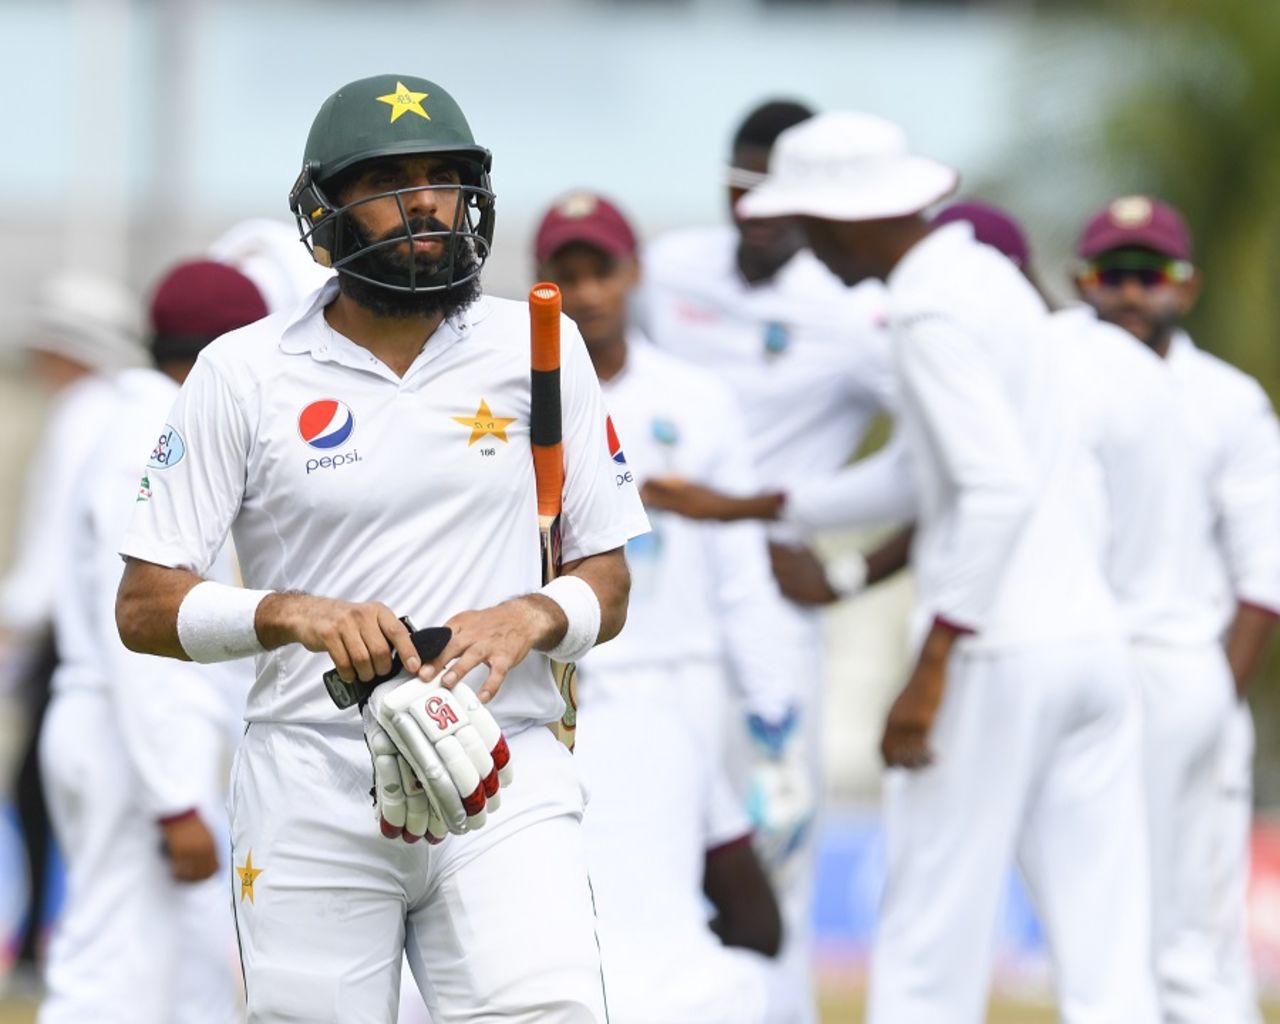 Misbah-ul-Haq was bounced out for 99, West Indies v Pakistan, 2nd Test, Bridgetown, 3rd day, May 2, 2017